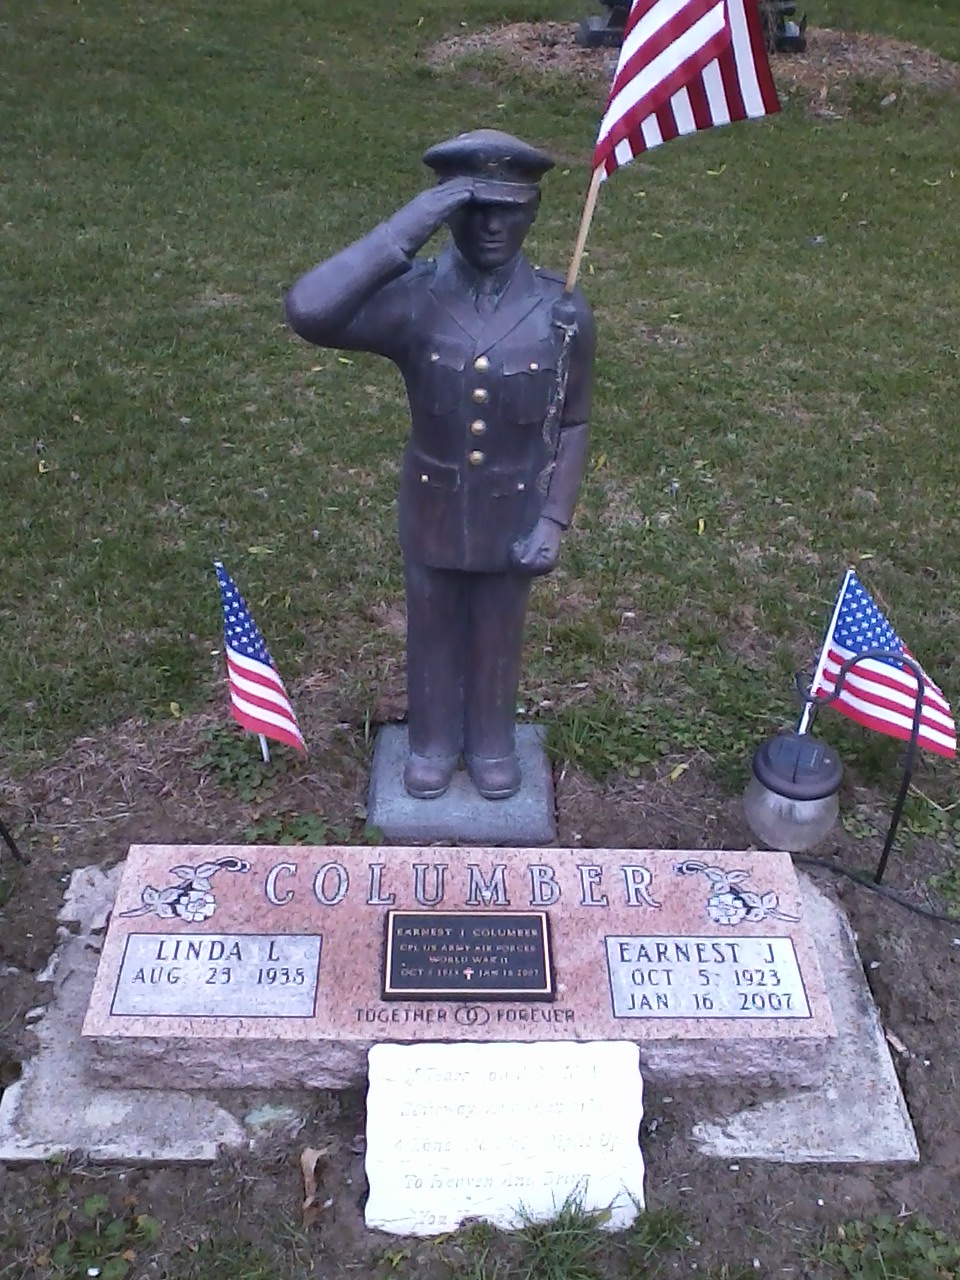 Ernest J. Columber in Weston, Ohio Cemetery - front